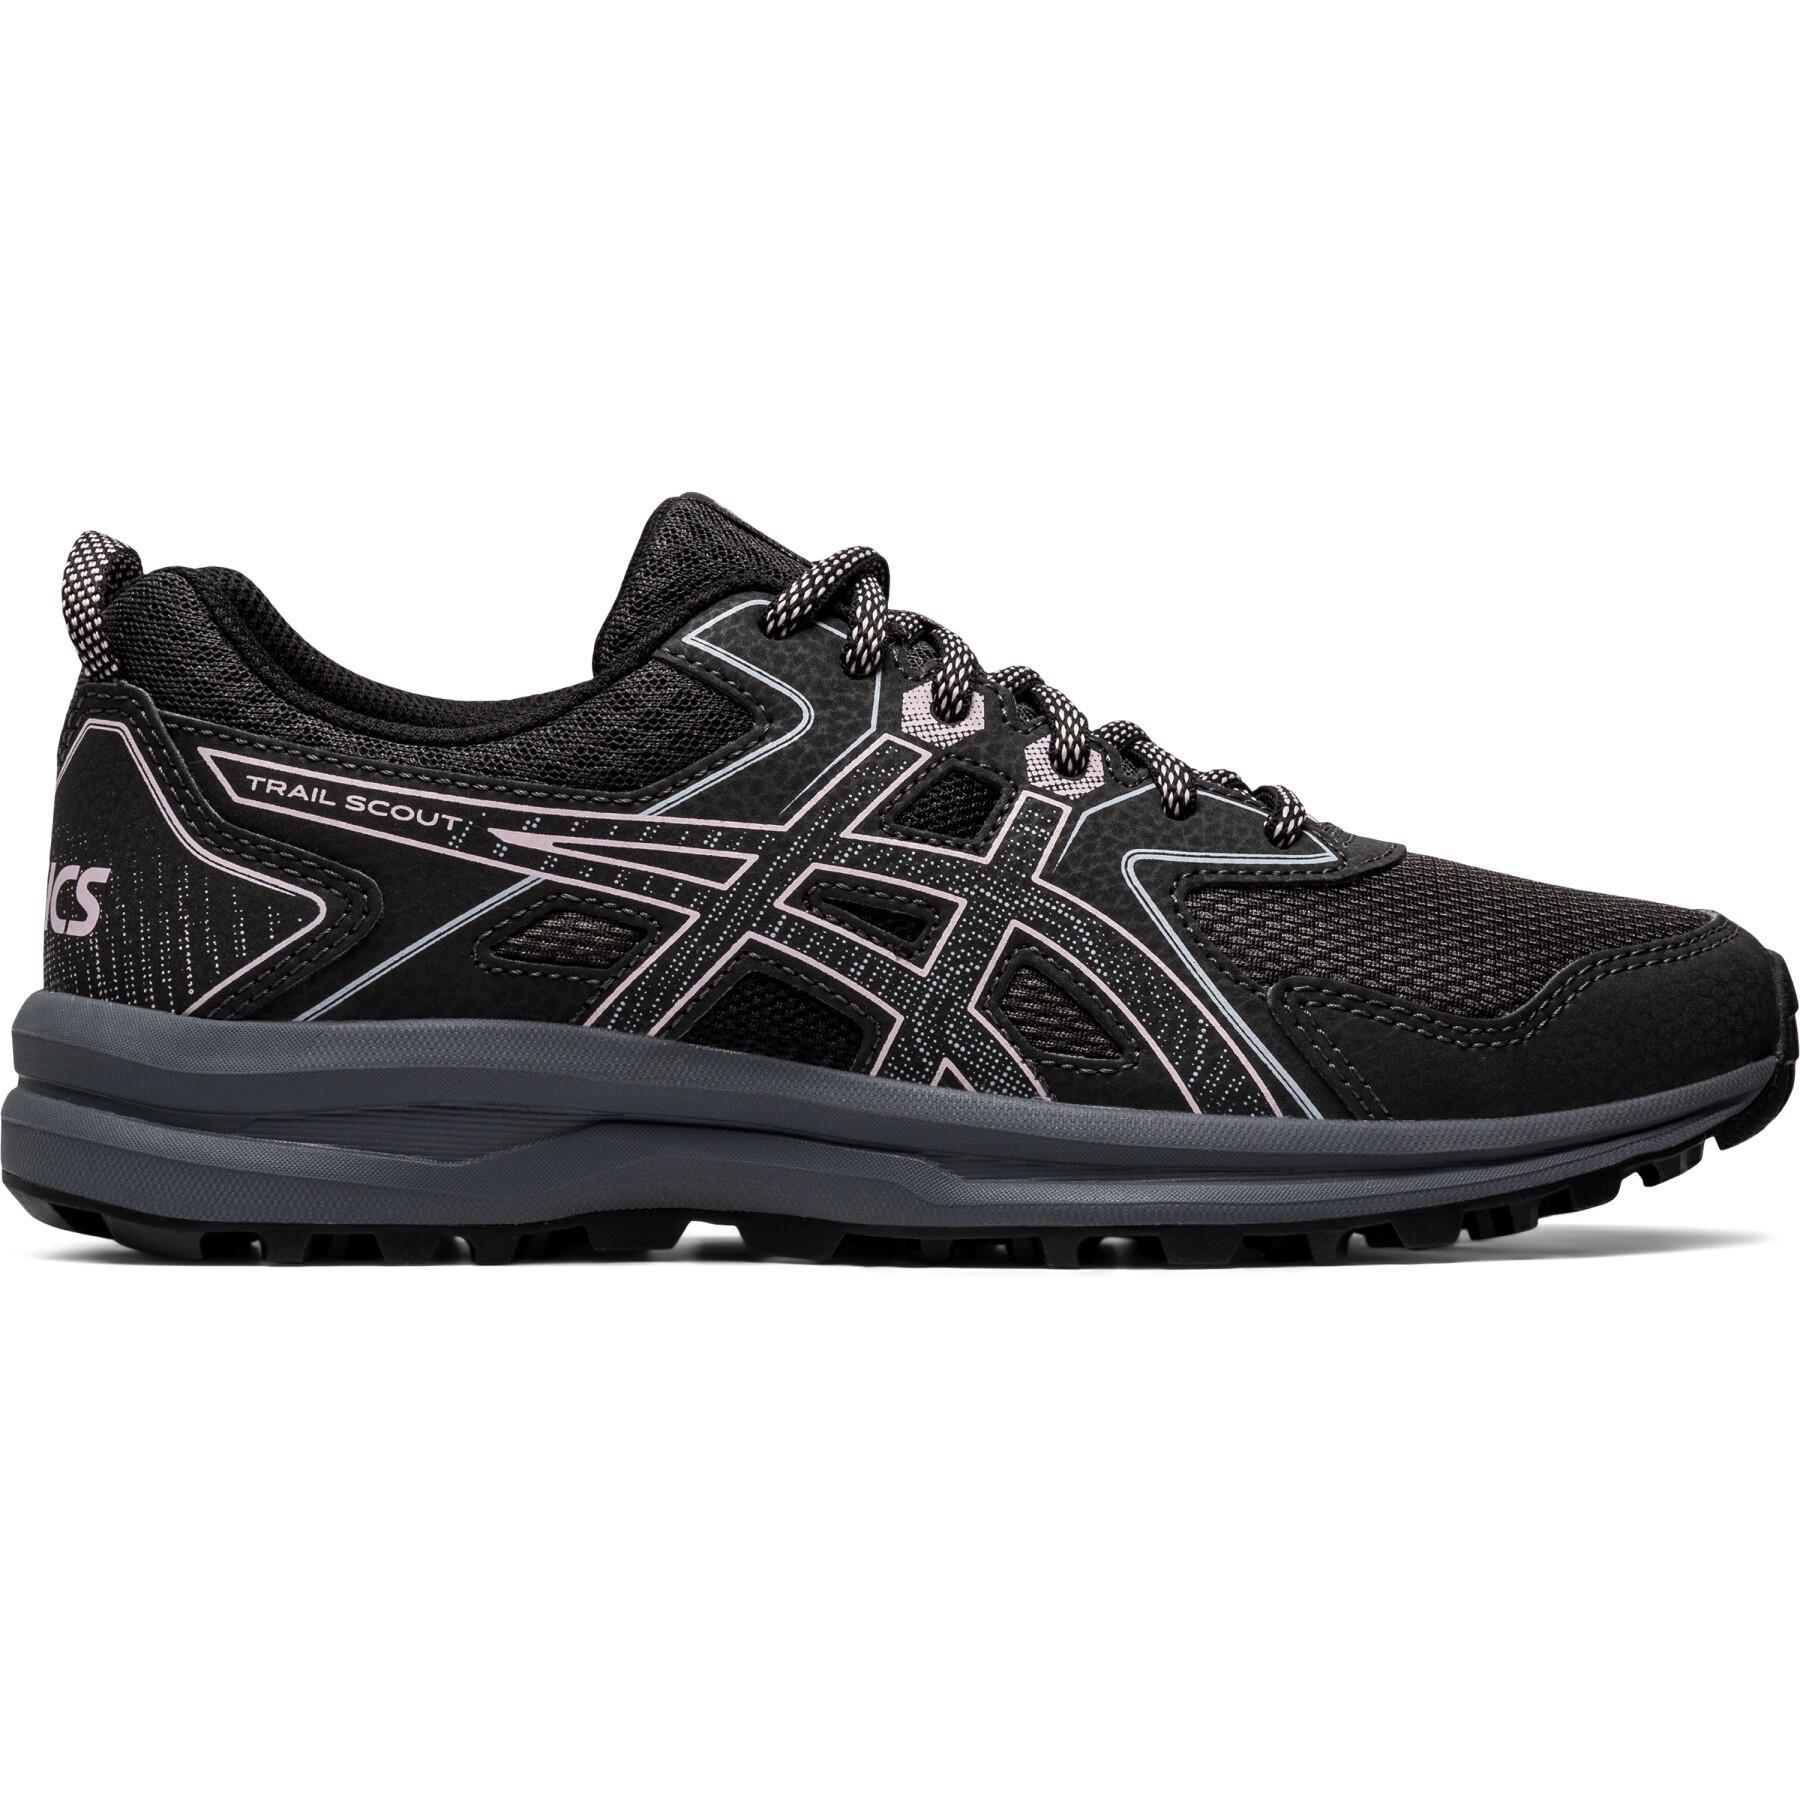 Chaussures femme Asics Trailout